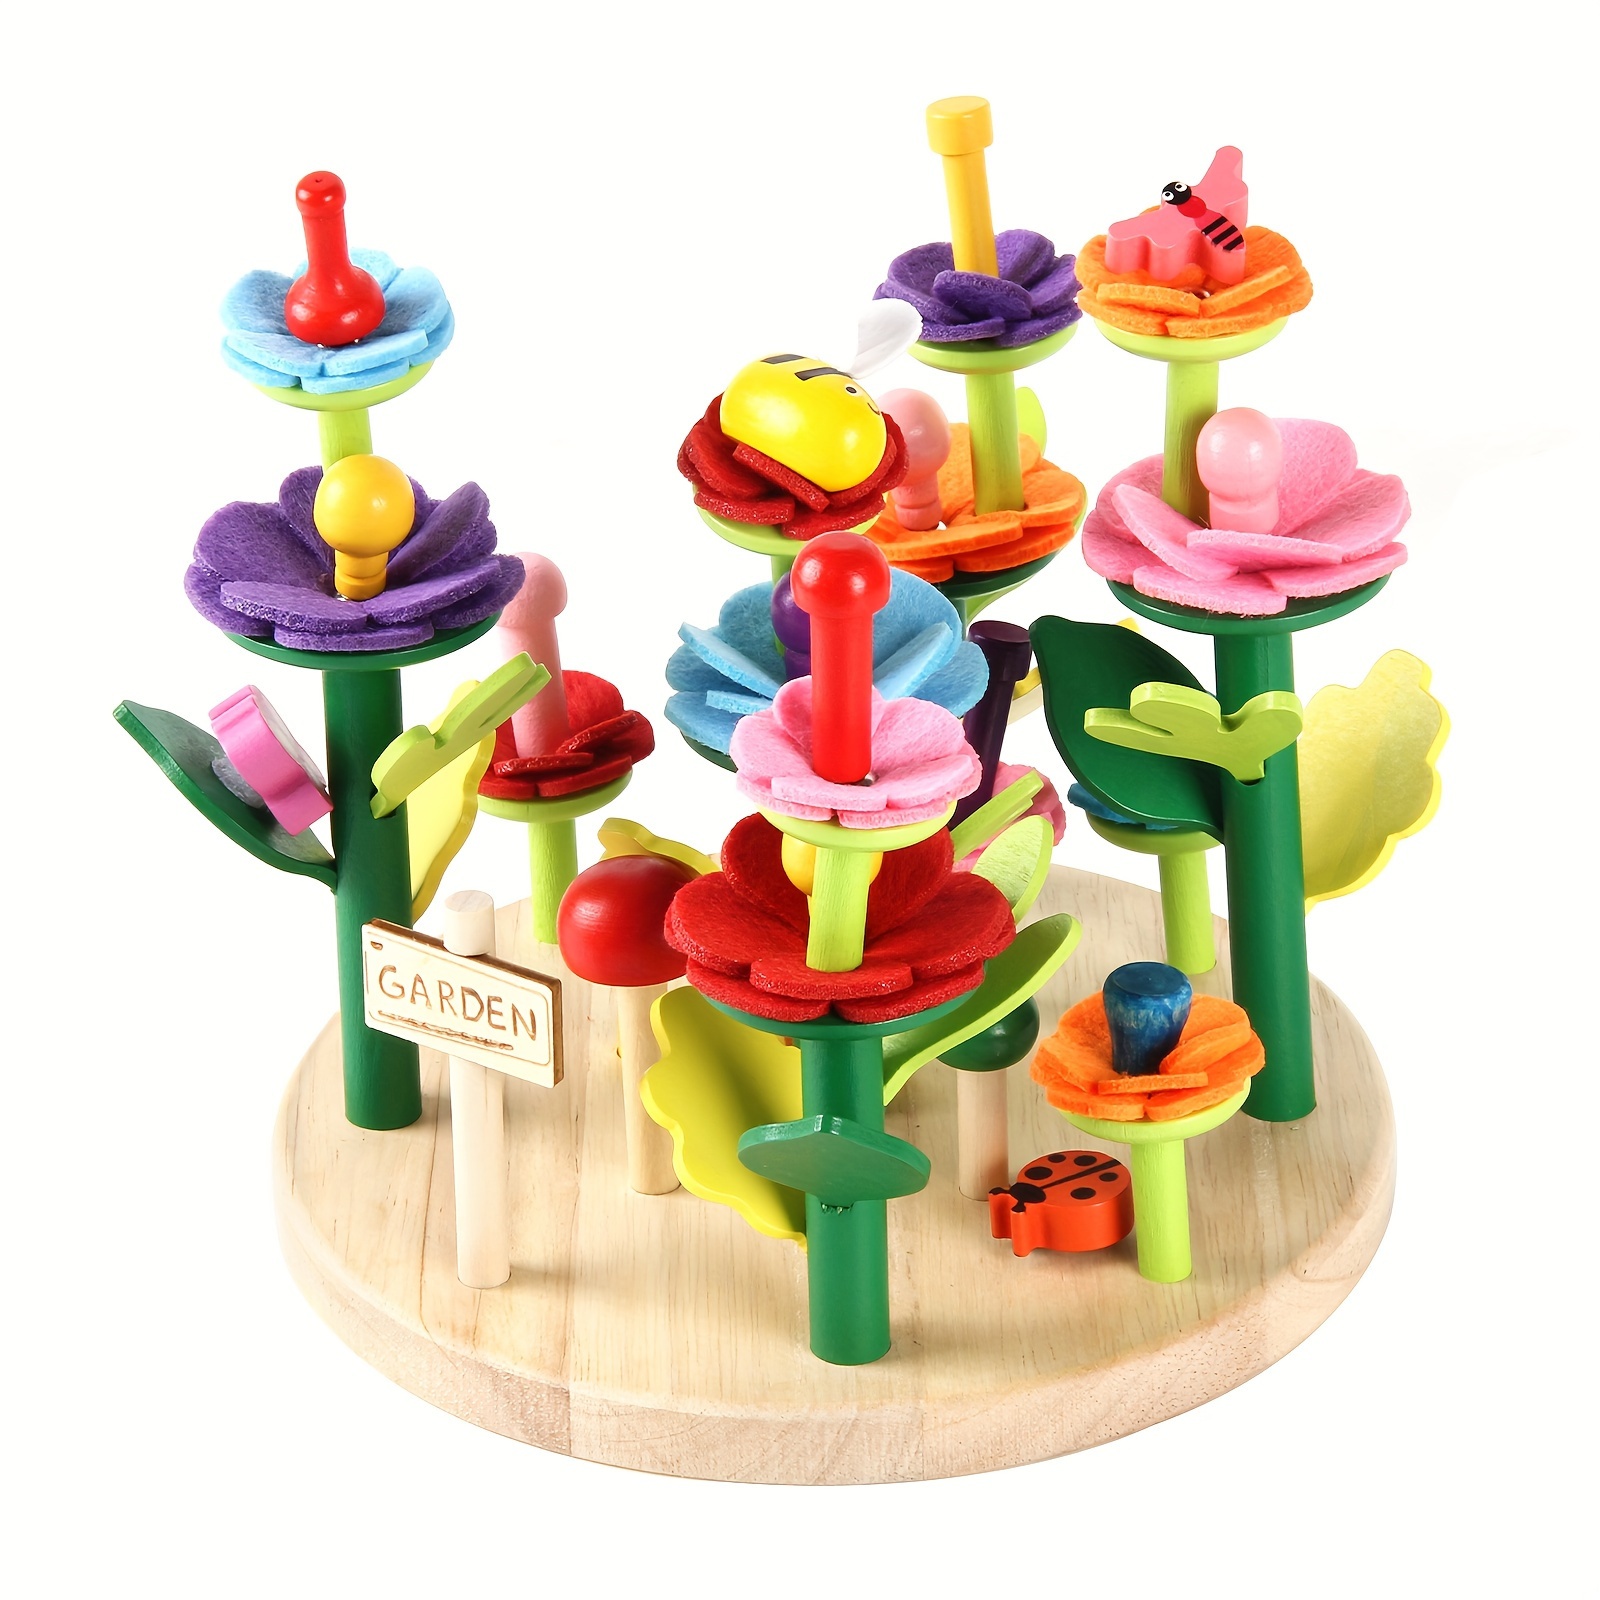 

Wooden Flower Garden Building Toys For Girls, Stem Educational Activity Preschool Kit For Kids Age 3 4 5 6 7 Years Old, Stacking Game For Toddlers Build A Bouquet Pretend Play Set